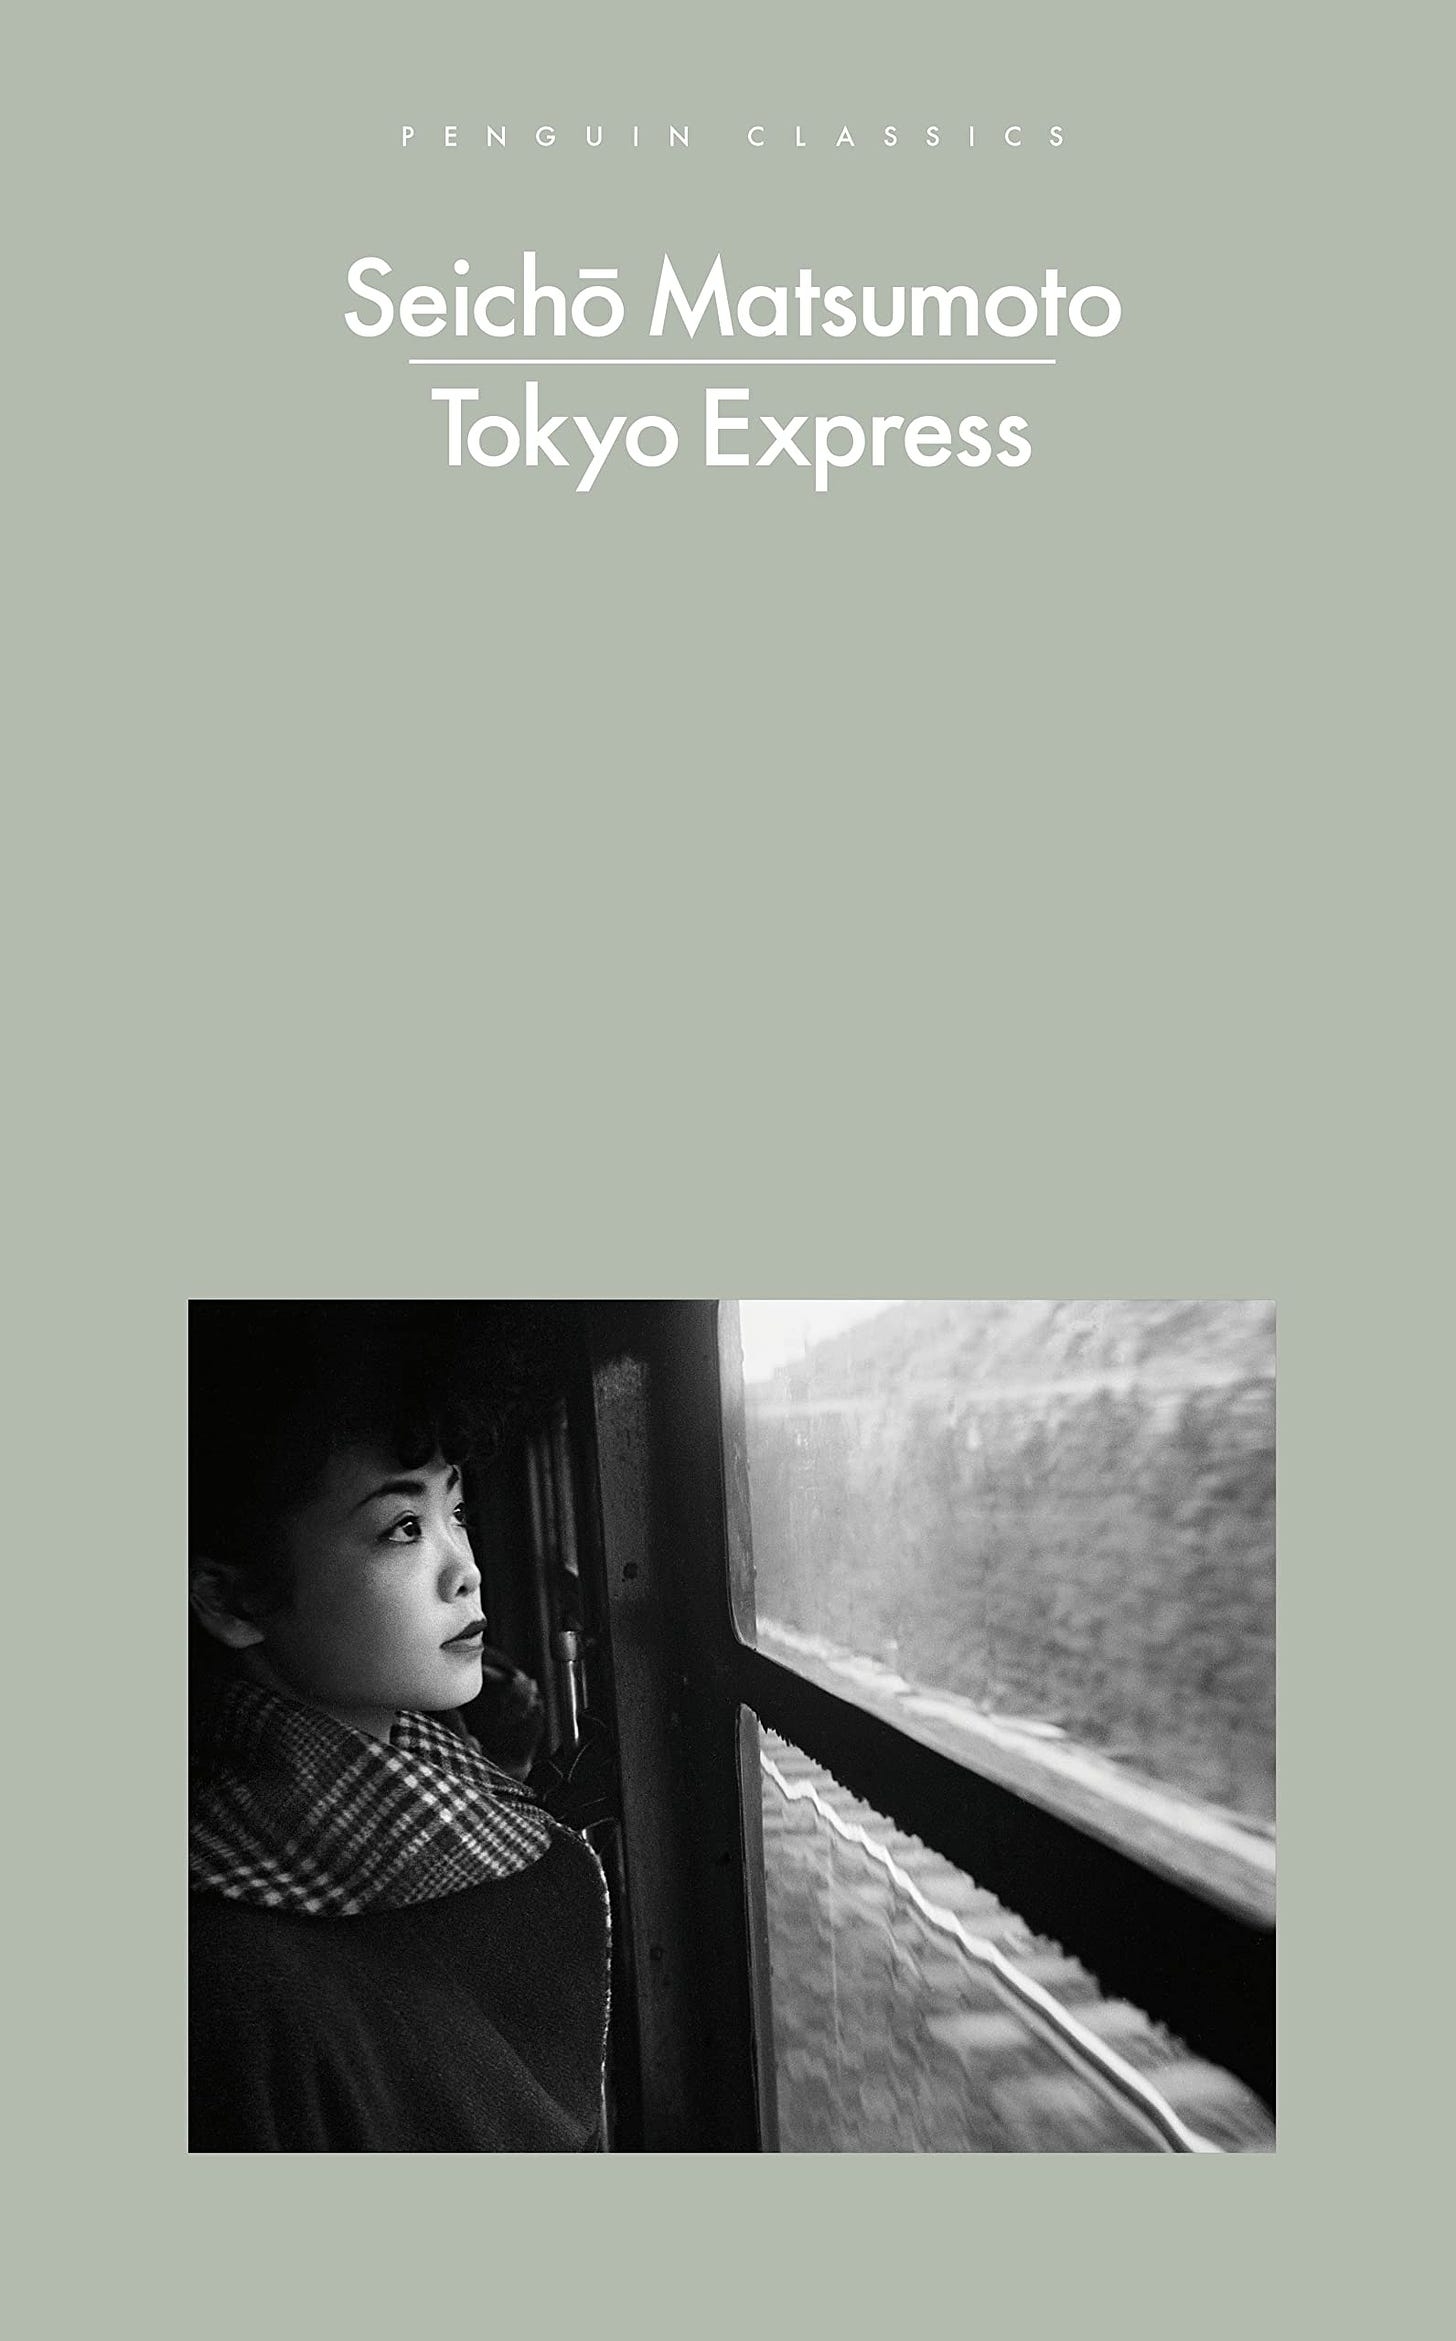 The cover of Tokyo Express, a book by Seicho Matsumoto